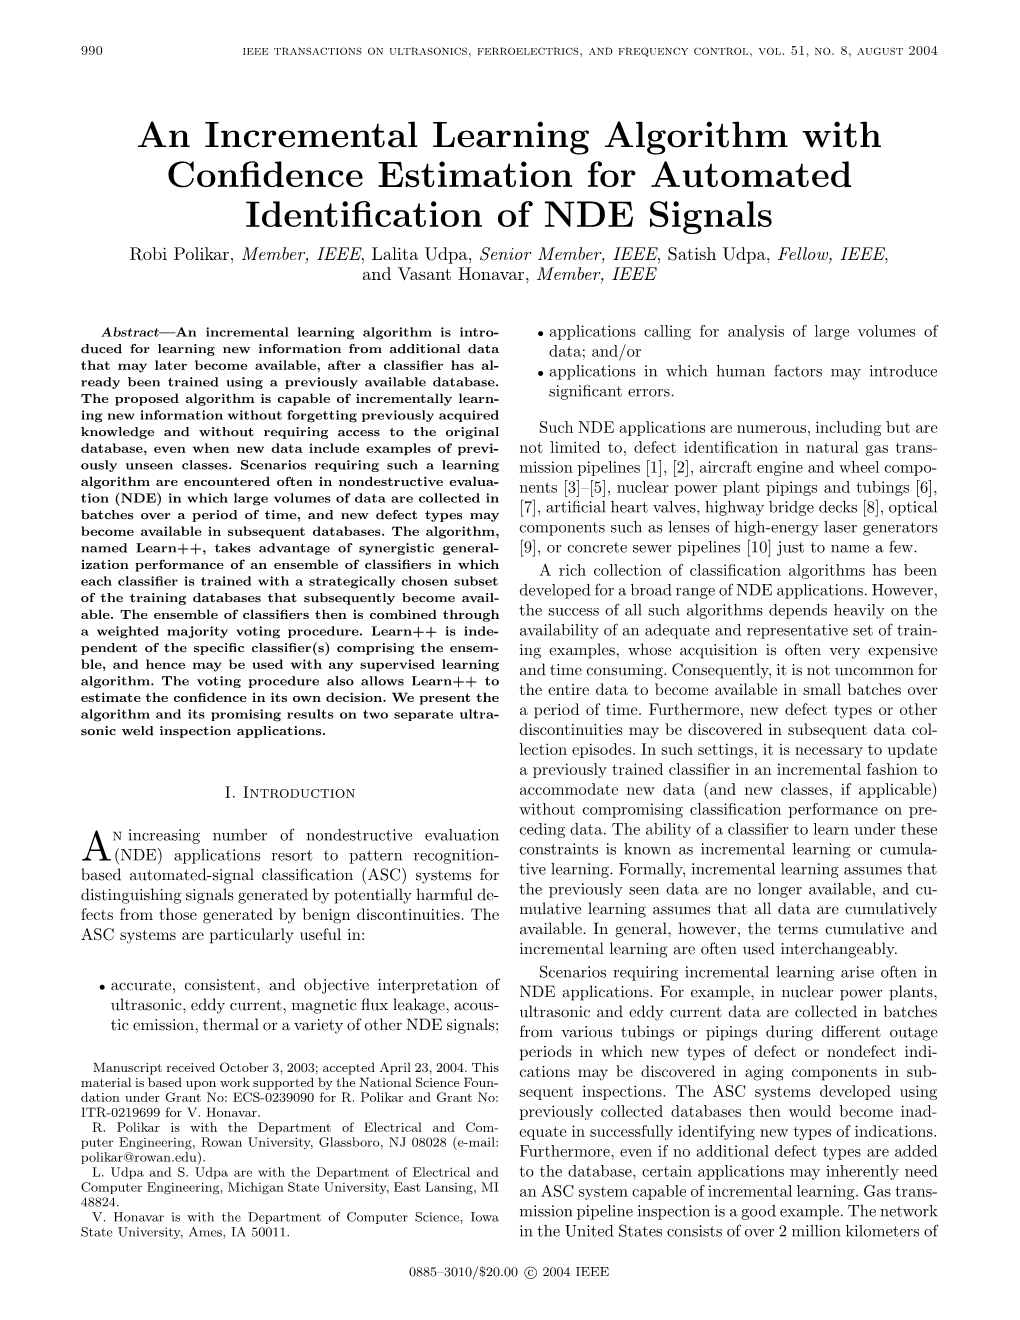 An Incremental Learning Algorithm with Confidence Estimation For